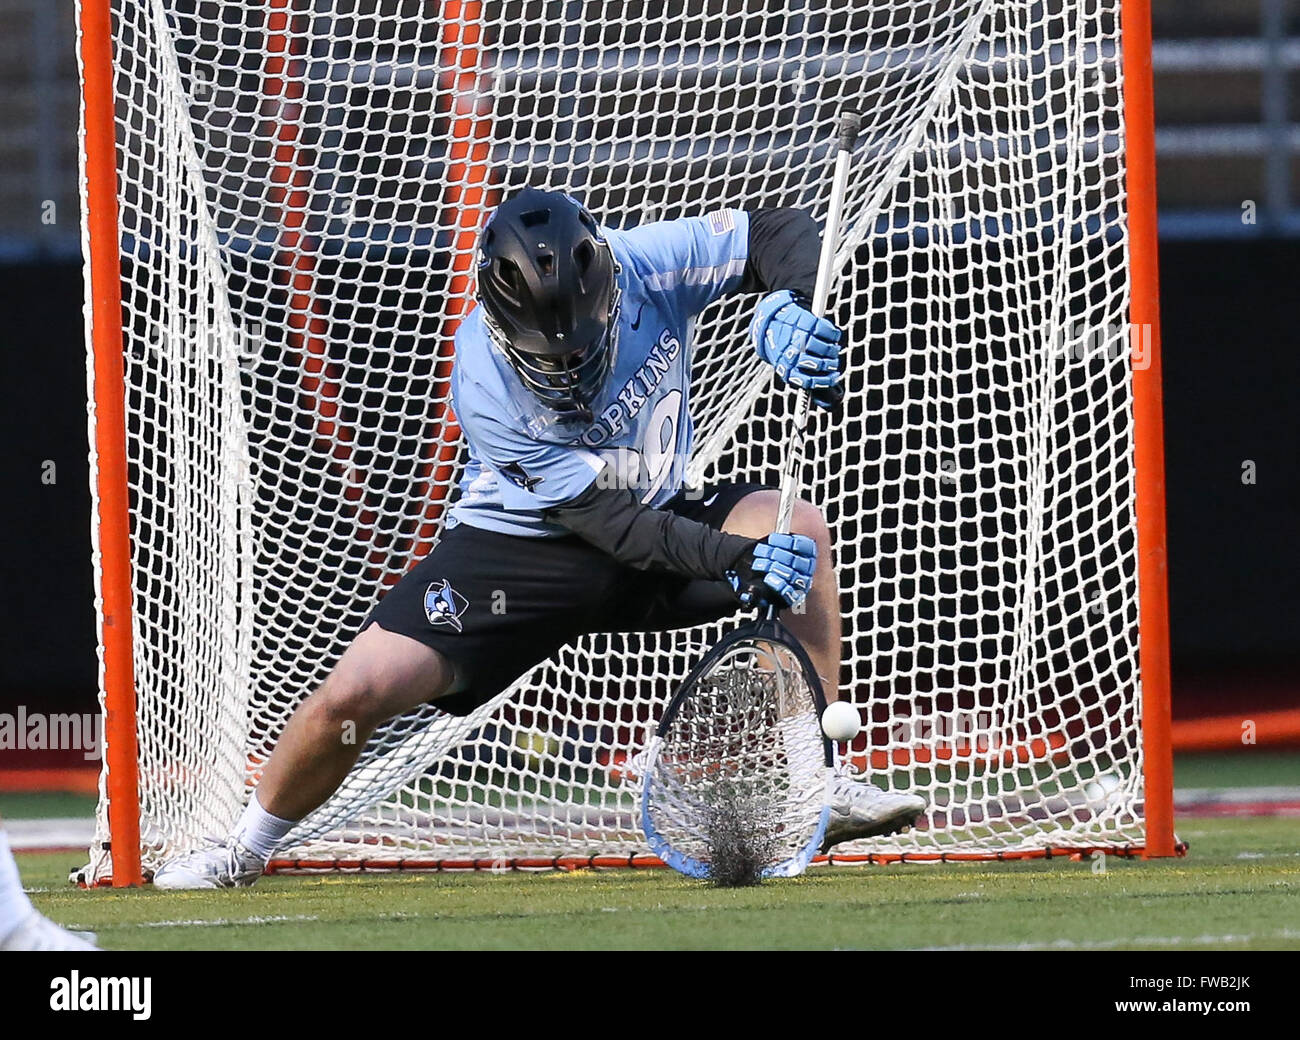 Piscataway, NJ, USA. 2nd Apr, 2016. Johns Hopkins goalkeeper Brock Turnbaugh (29) makes a save during an NCAA Lacrosse game between the Johns Hopkins Blue Jays and the Rutgers Scarlet Knights at High Point Solutions Stadium in Piscataway, NJ. Rutgers defeated Johns Hopkins, 16-9. Mike Langish/Cal Sport Media. © csm/Alamy Live News Stock Photo